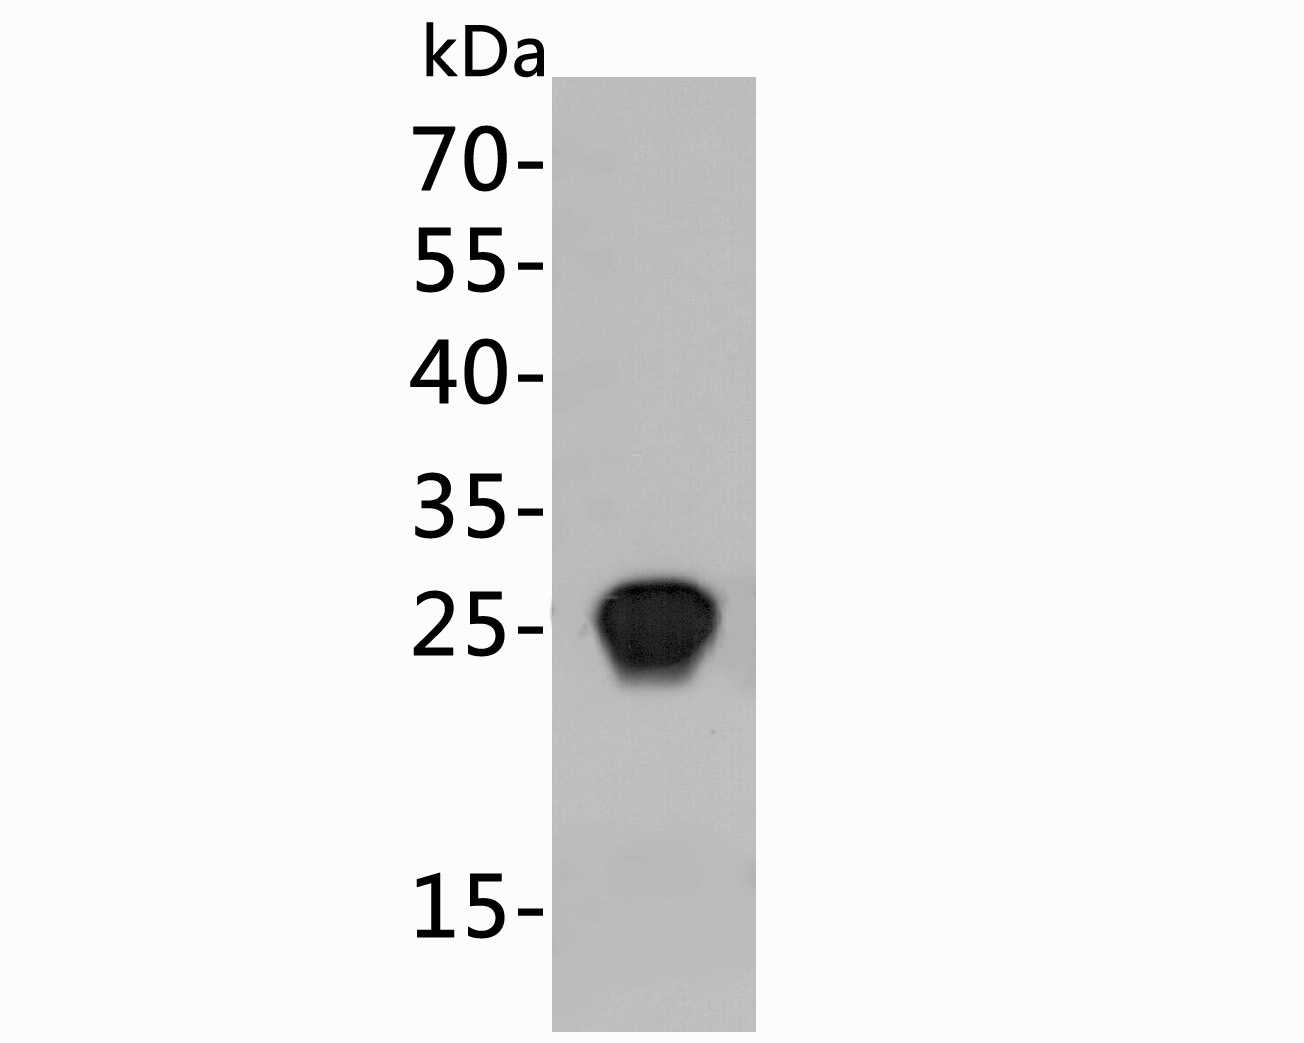 Western blot using anti-HIV1 p24 protein antibody shows detection of a 25 kDa band corresponding to Recombanint HIV1 p24 protein.